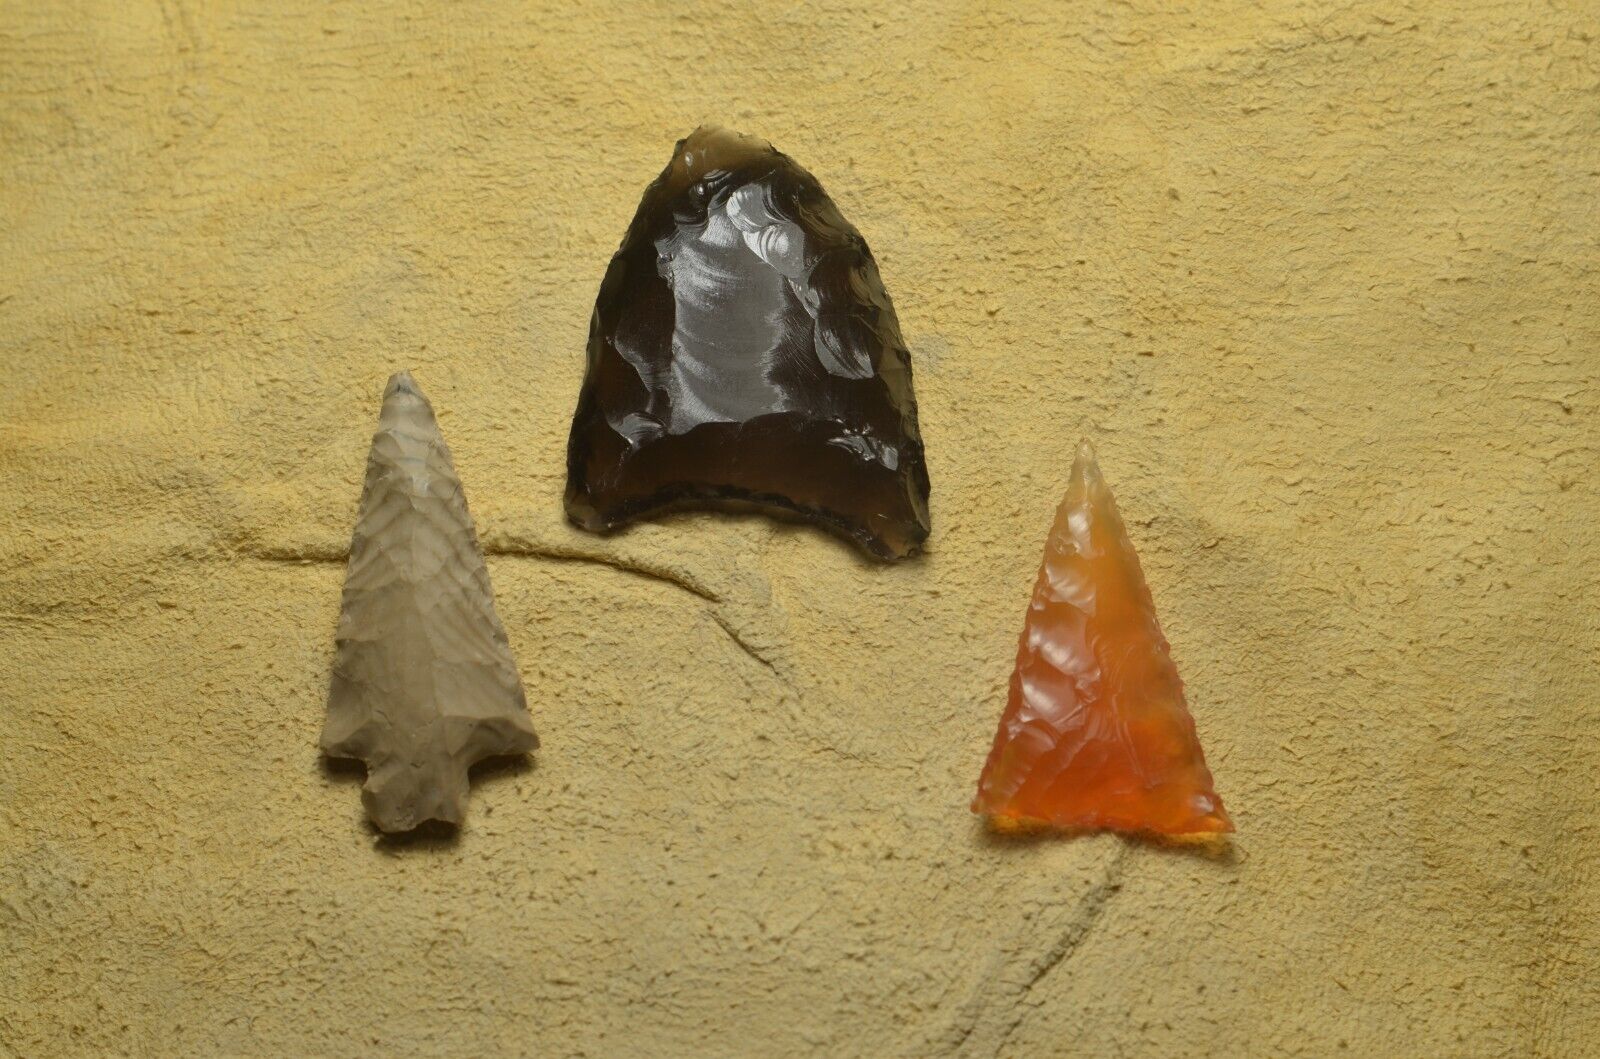 Authentic Modern Repro of North American Arrowhead Timeline